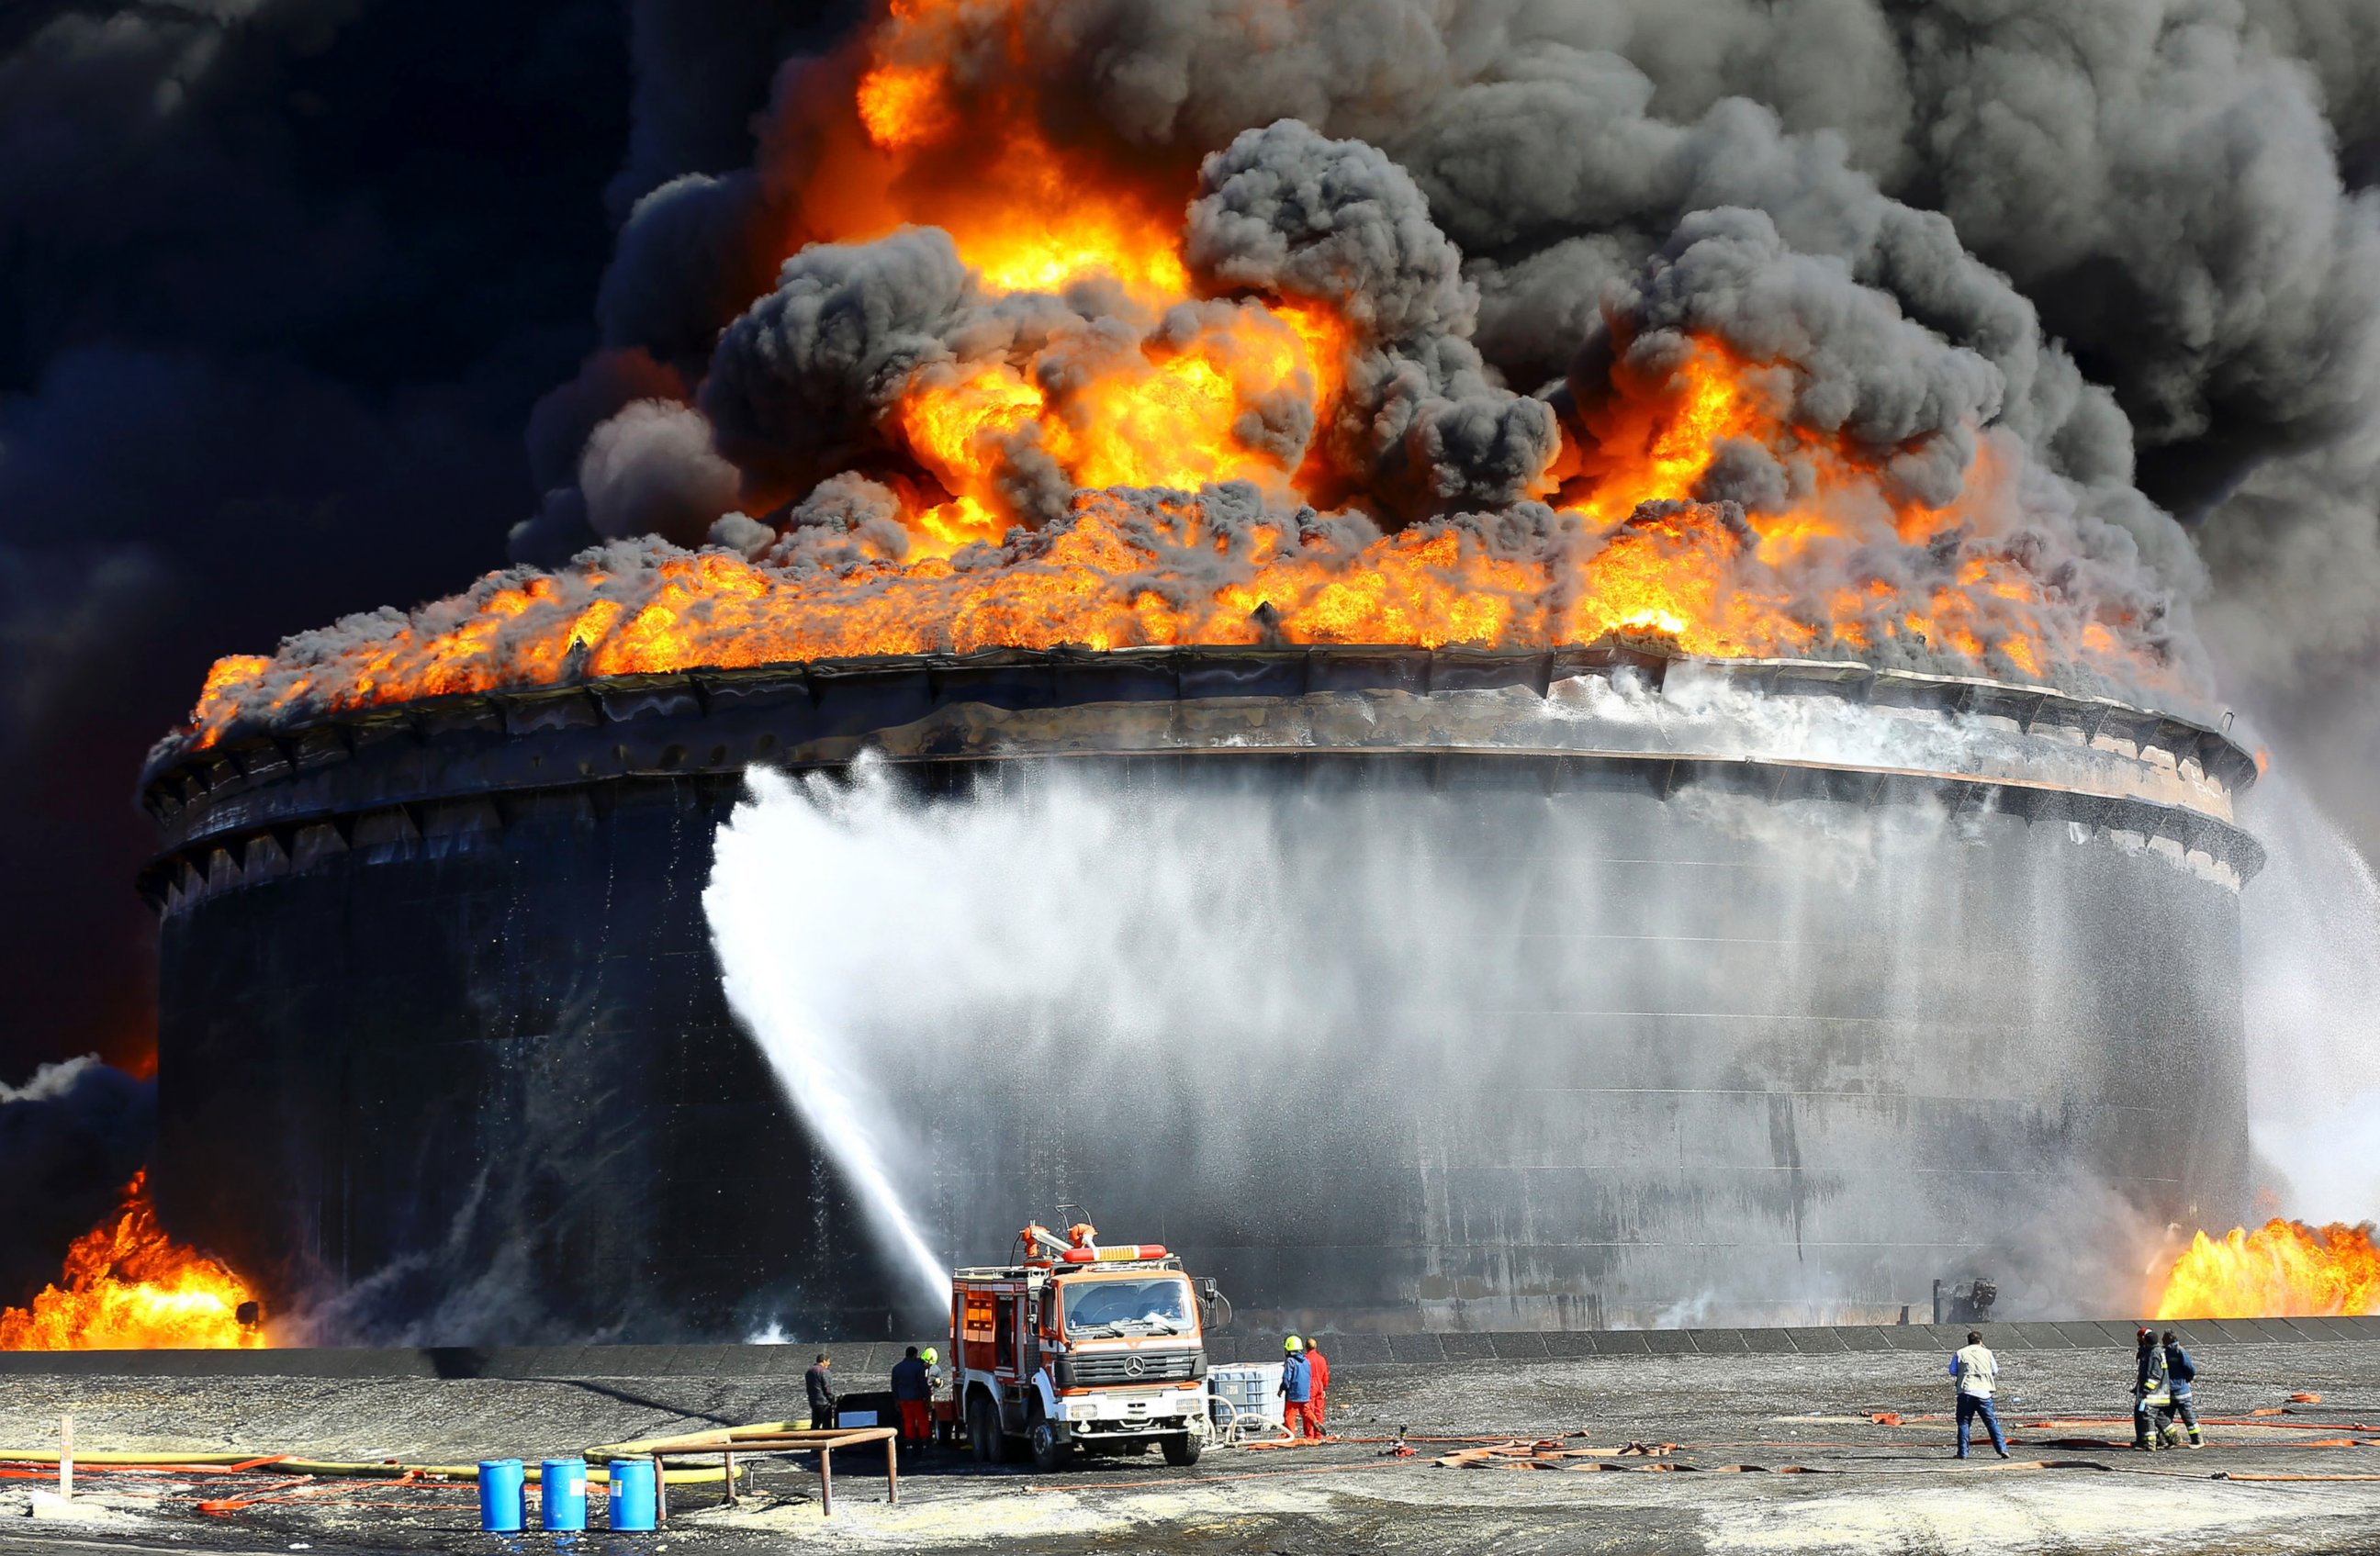 PHOTO: Firefighters work to put out the fire of a storage oil tank at the port of Es Sider in Ras Lanuf, Libya in this Dec. 29, 2014 file photo.